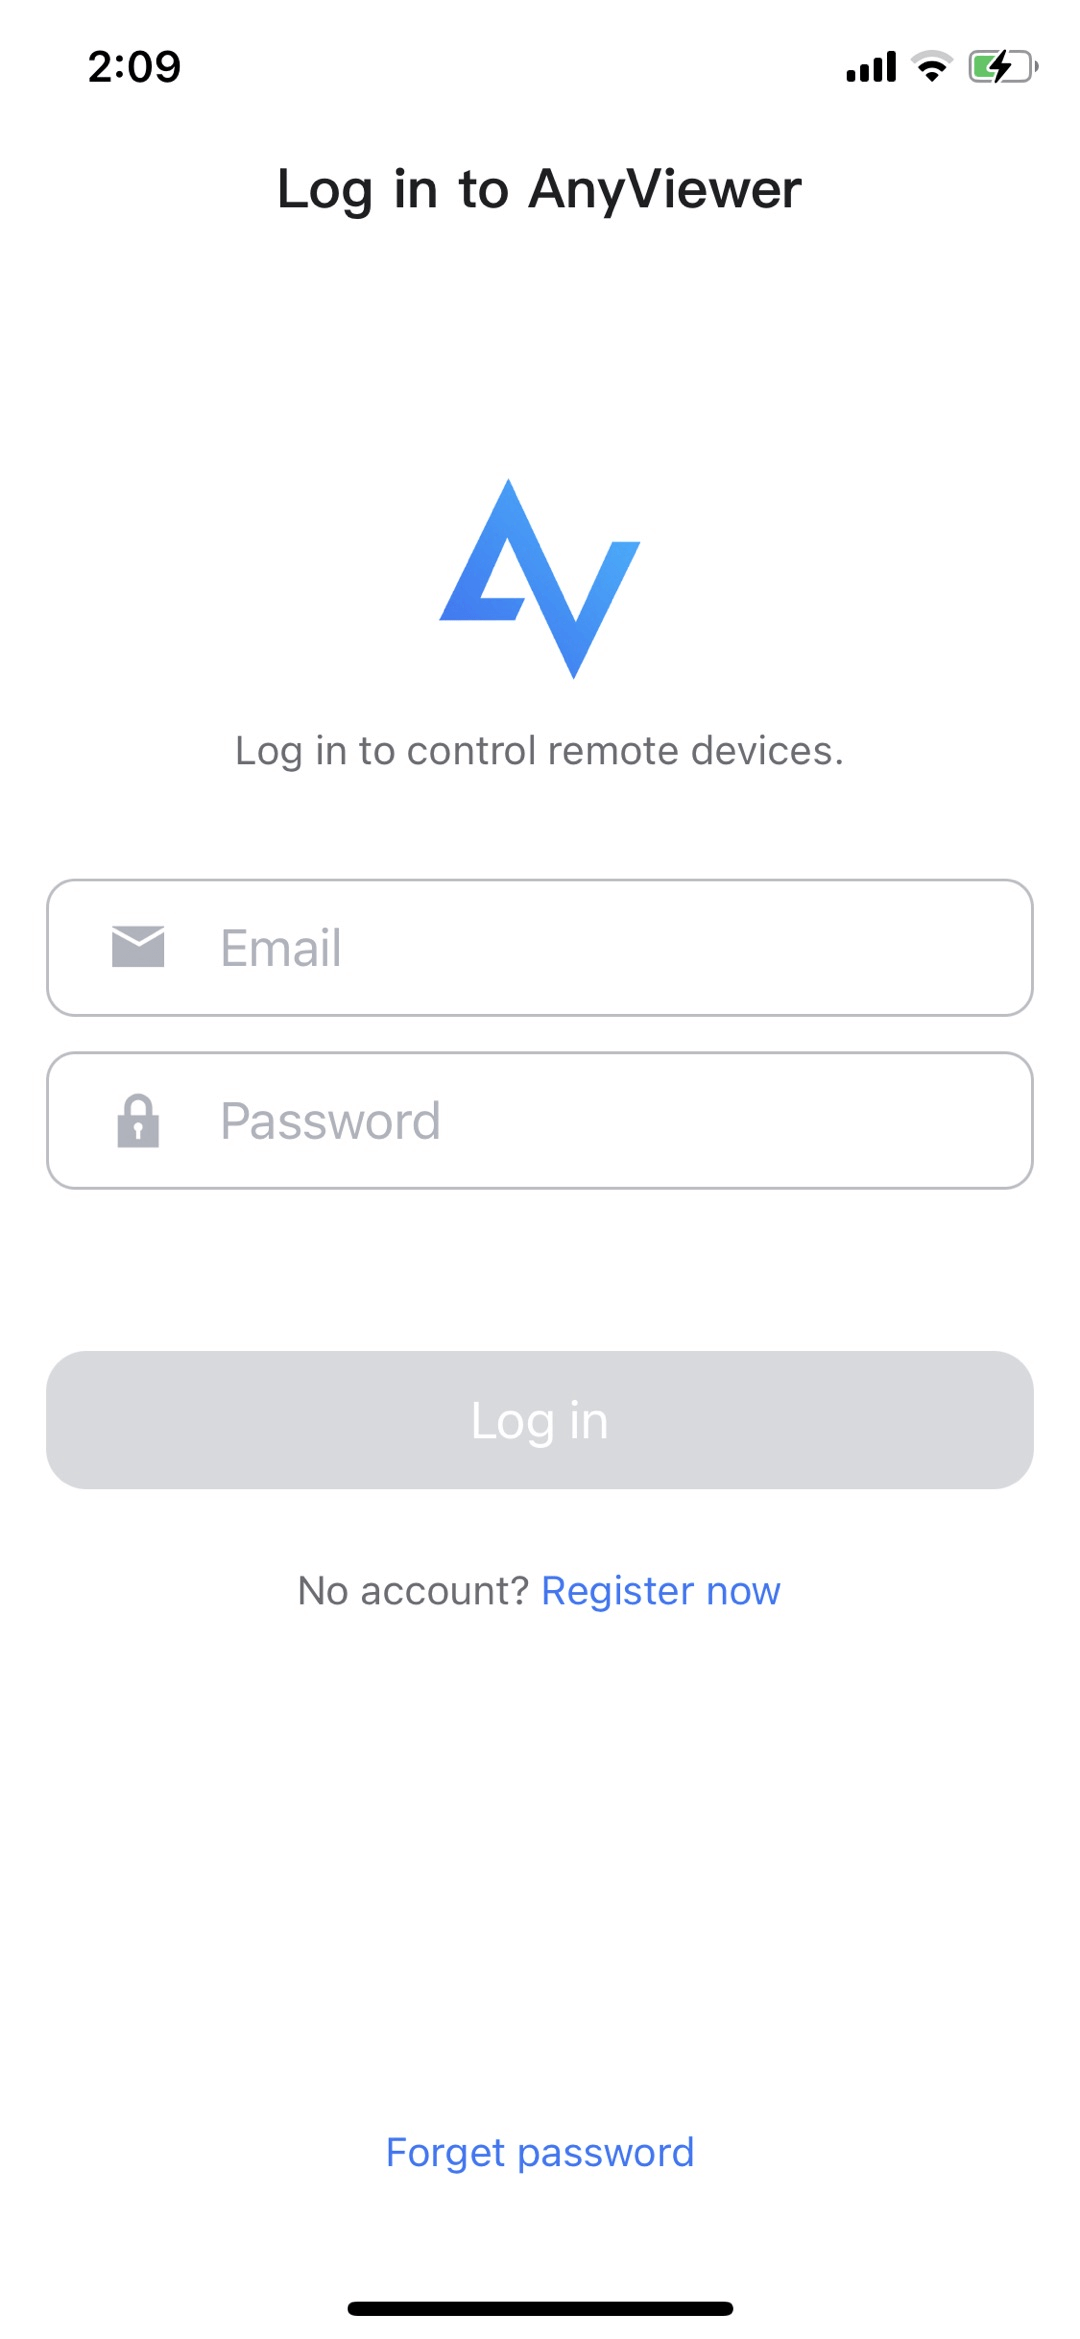 https://www.anyviewer.com/screenshot/anyviewer/log-in-to-anyviewer-ios.png